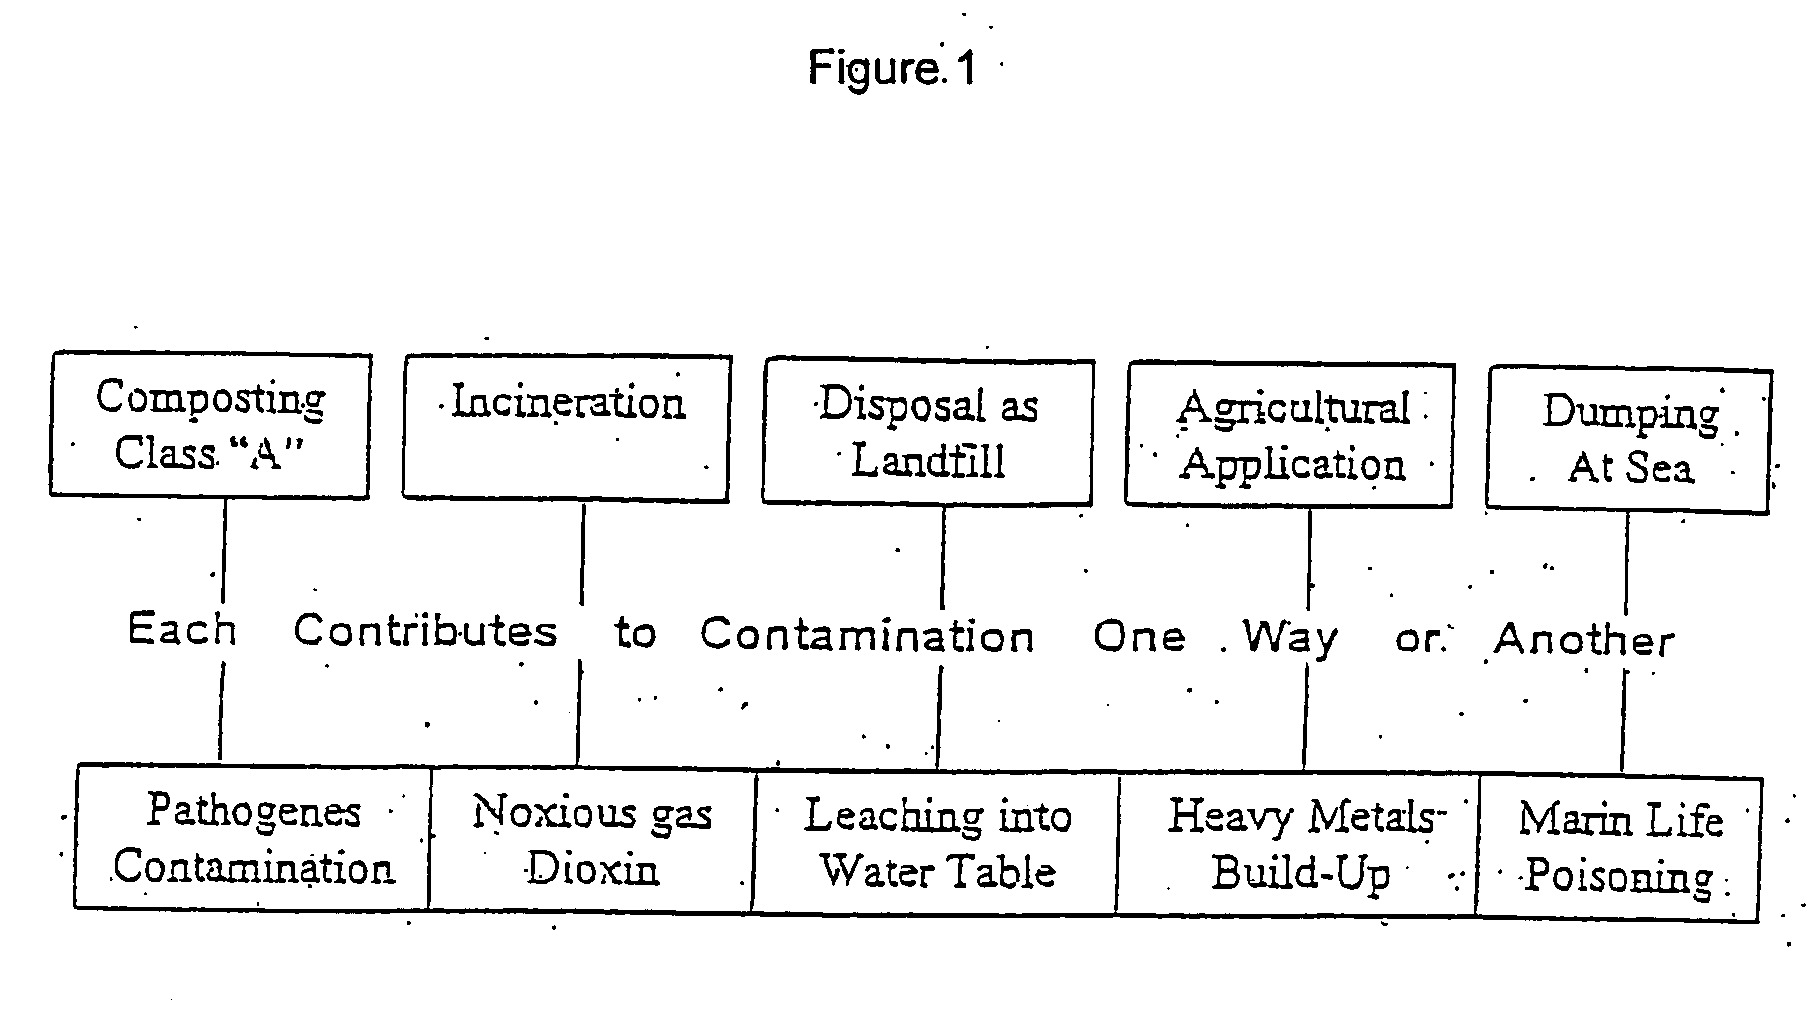 Process for treatment of organic waste